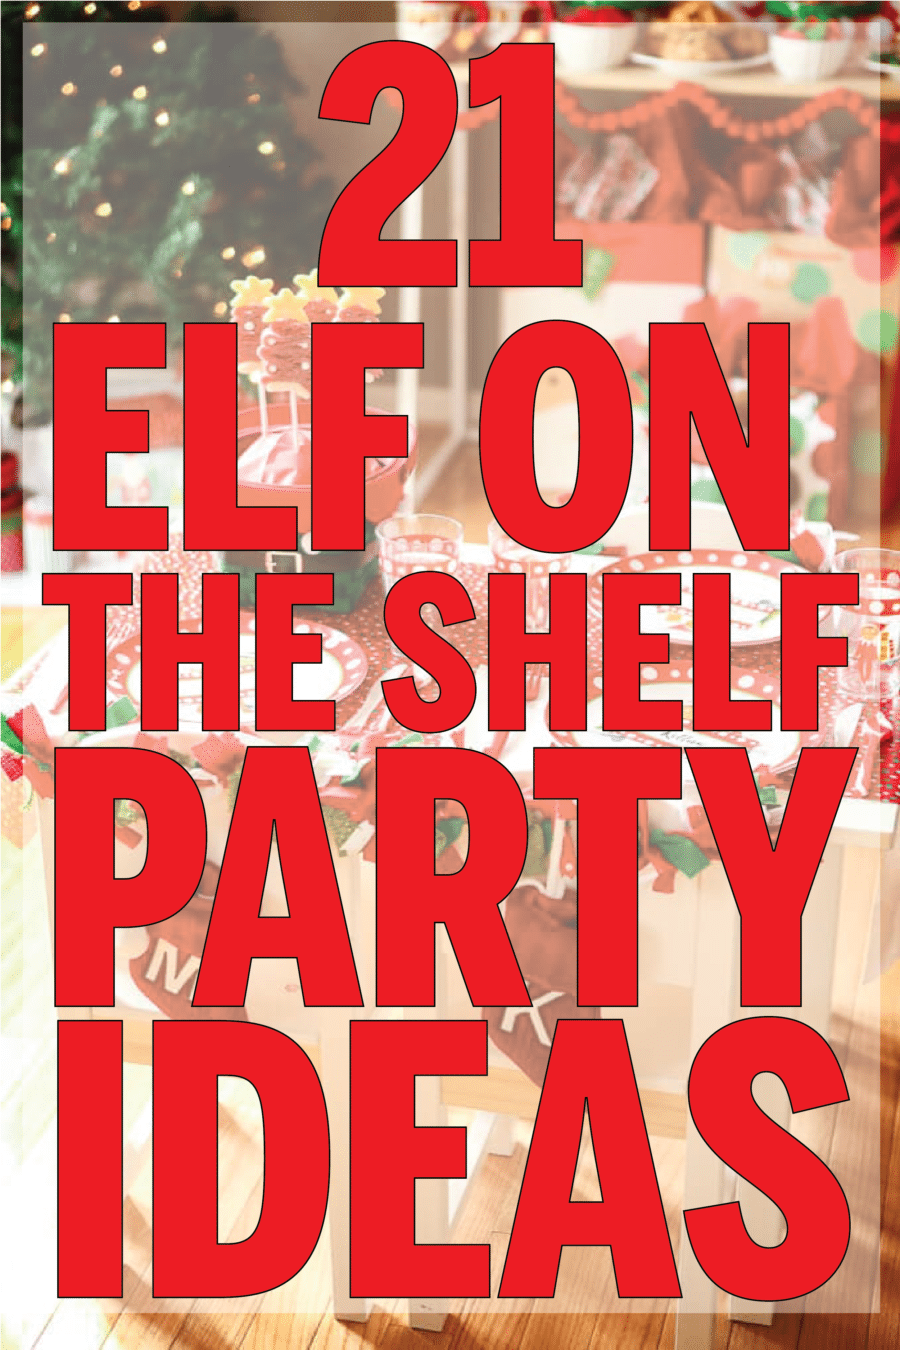 Fun Elf on the Shelf party ideas! Everything from elf themed food to games and more!